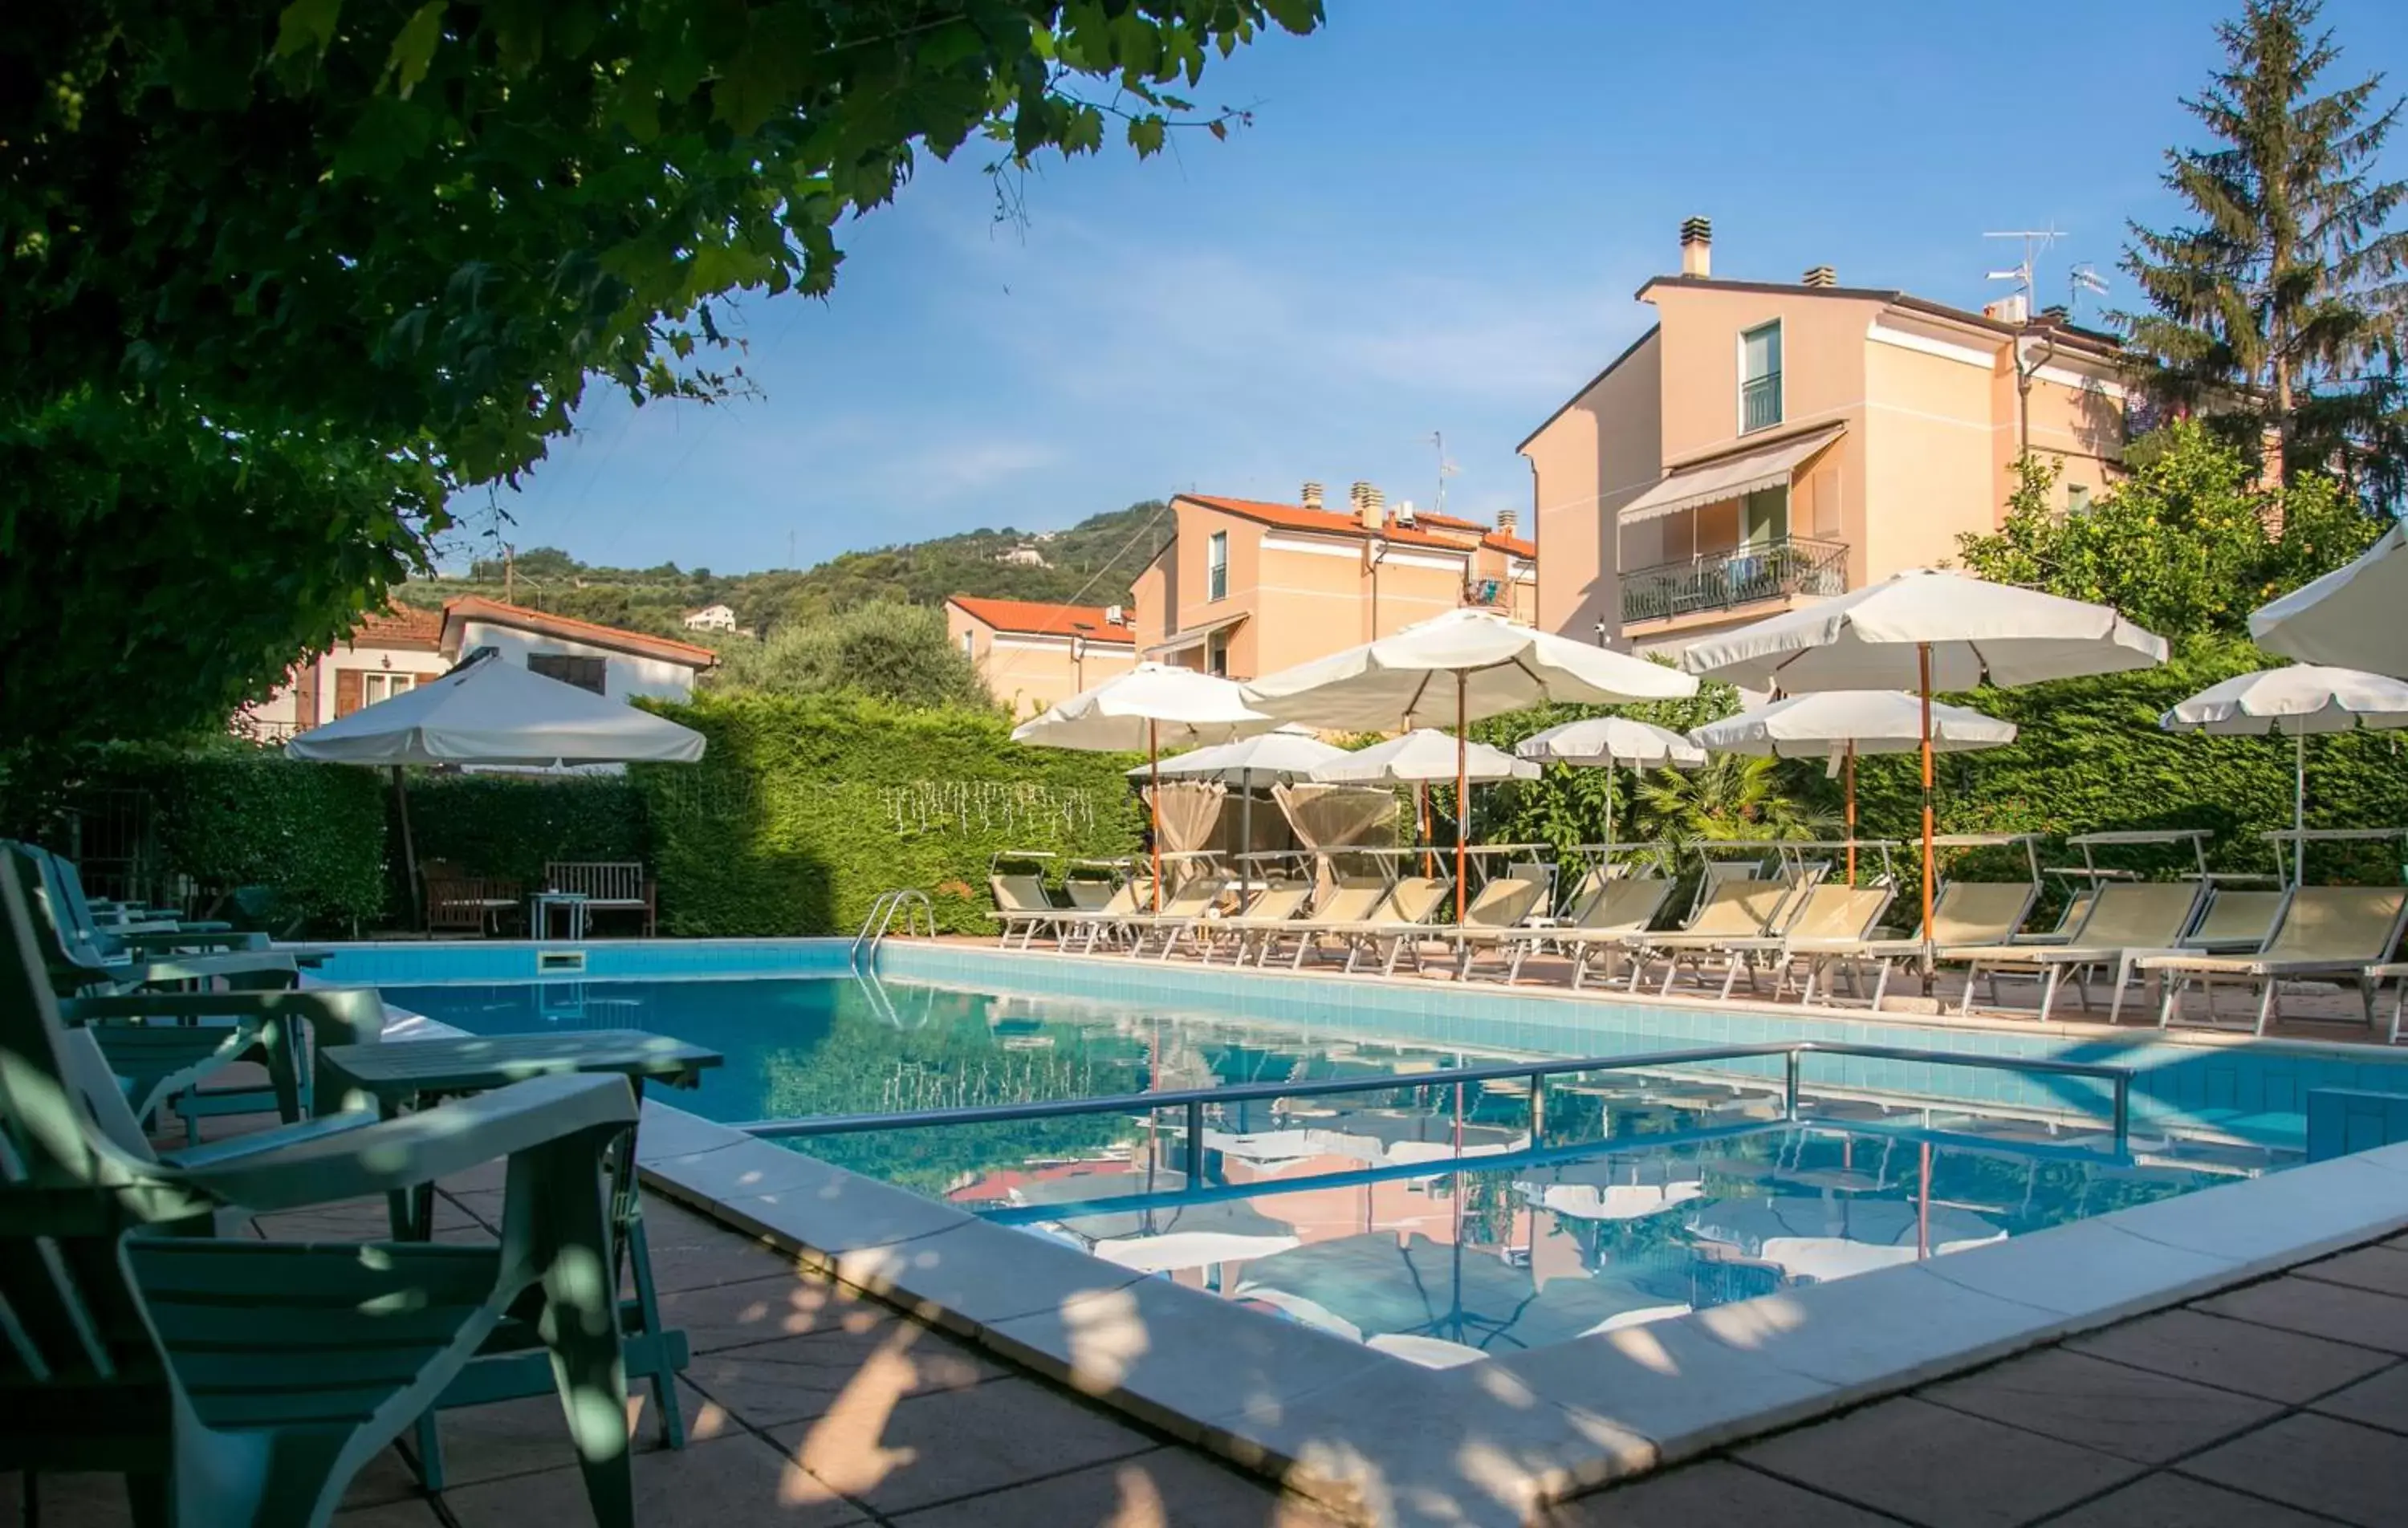 Property building, Swimming Pool in Residence Holidays